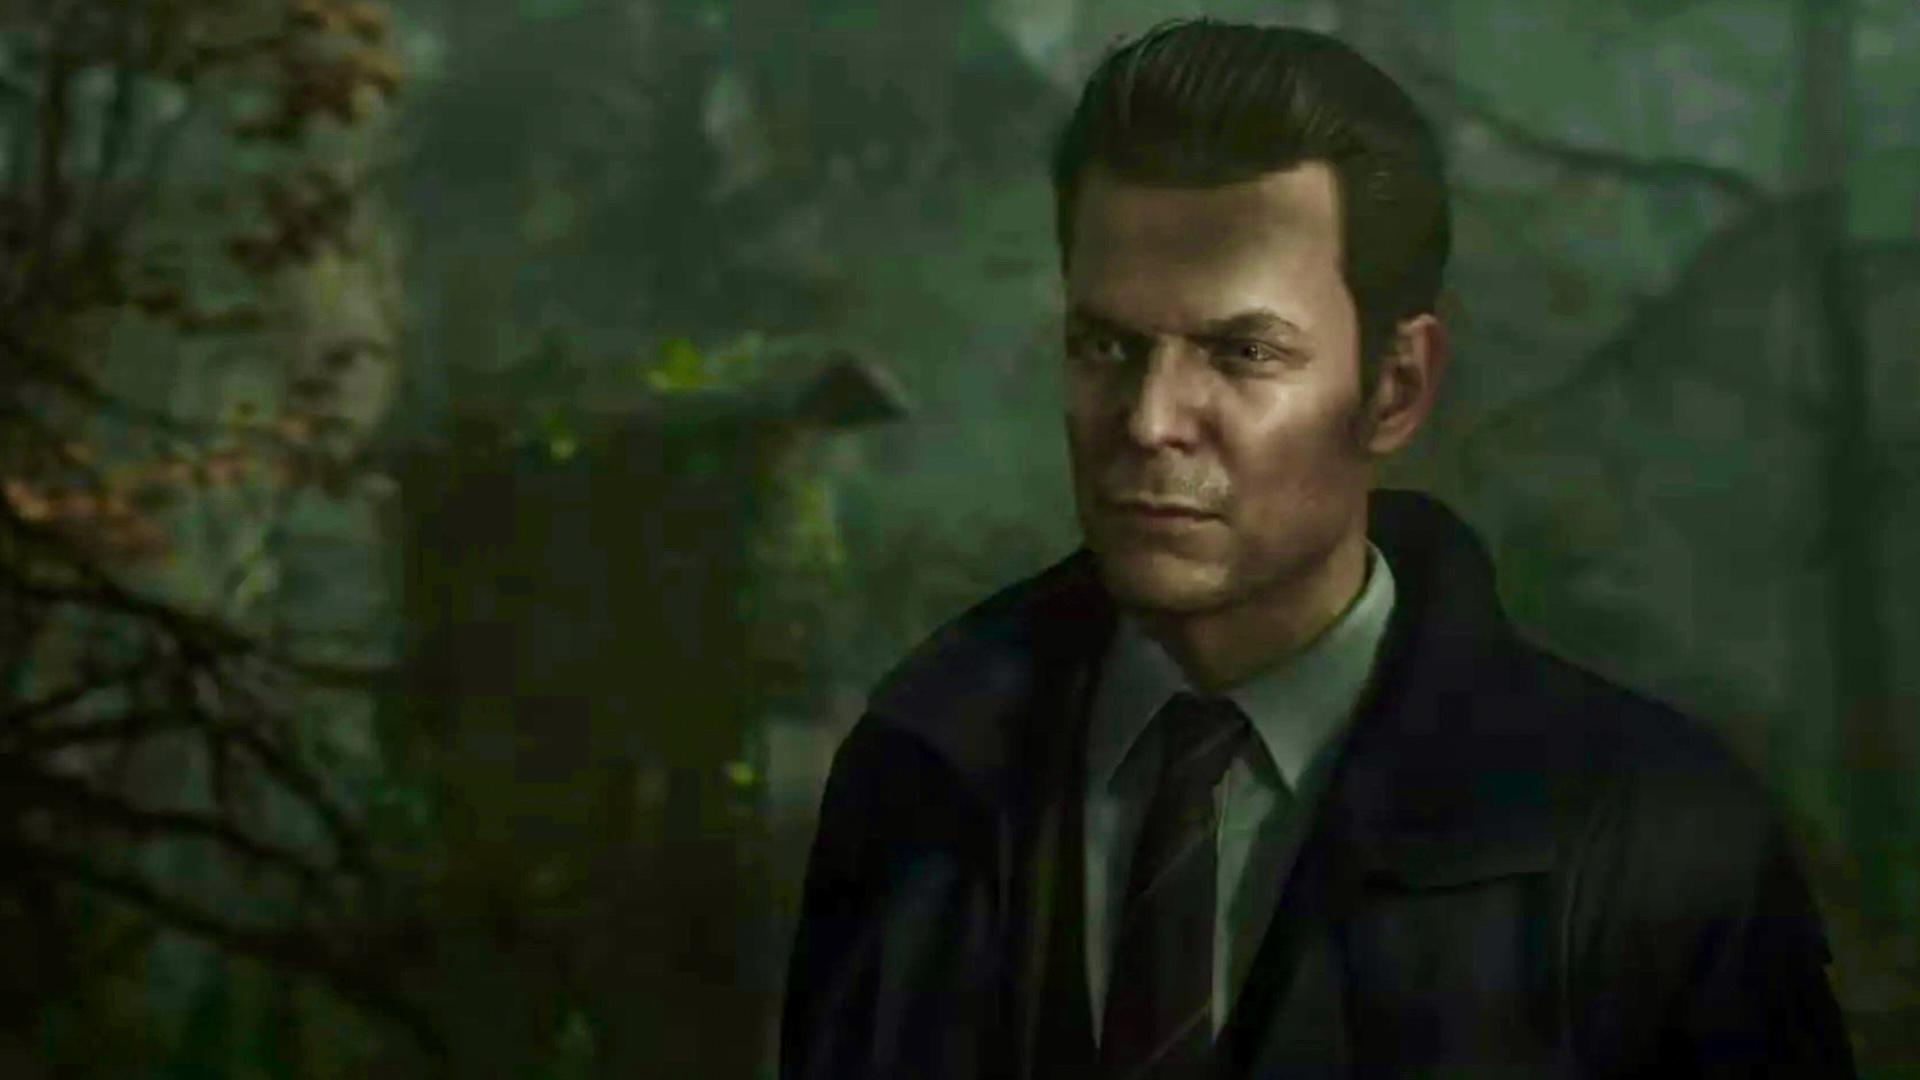 alan-wake-2-brings-max-payne-to-ps5-and-xbox-but-not-how-you-think